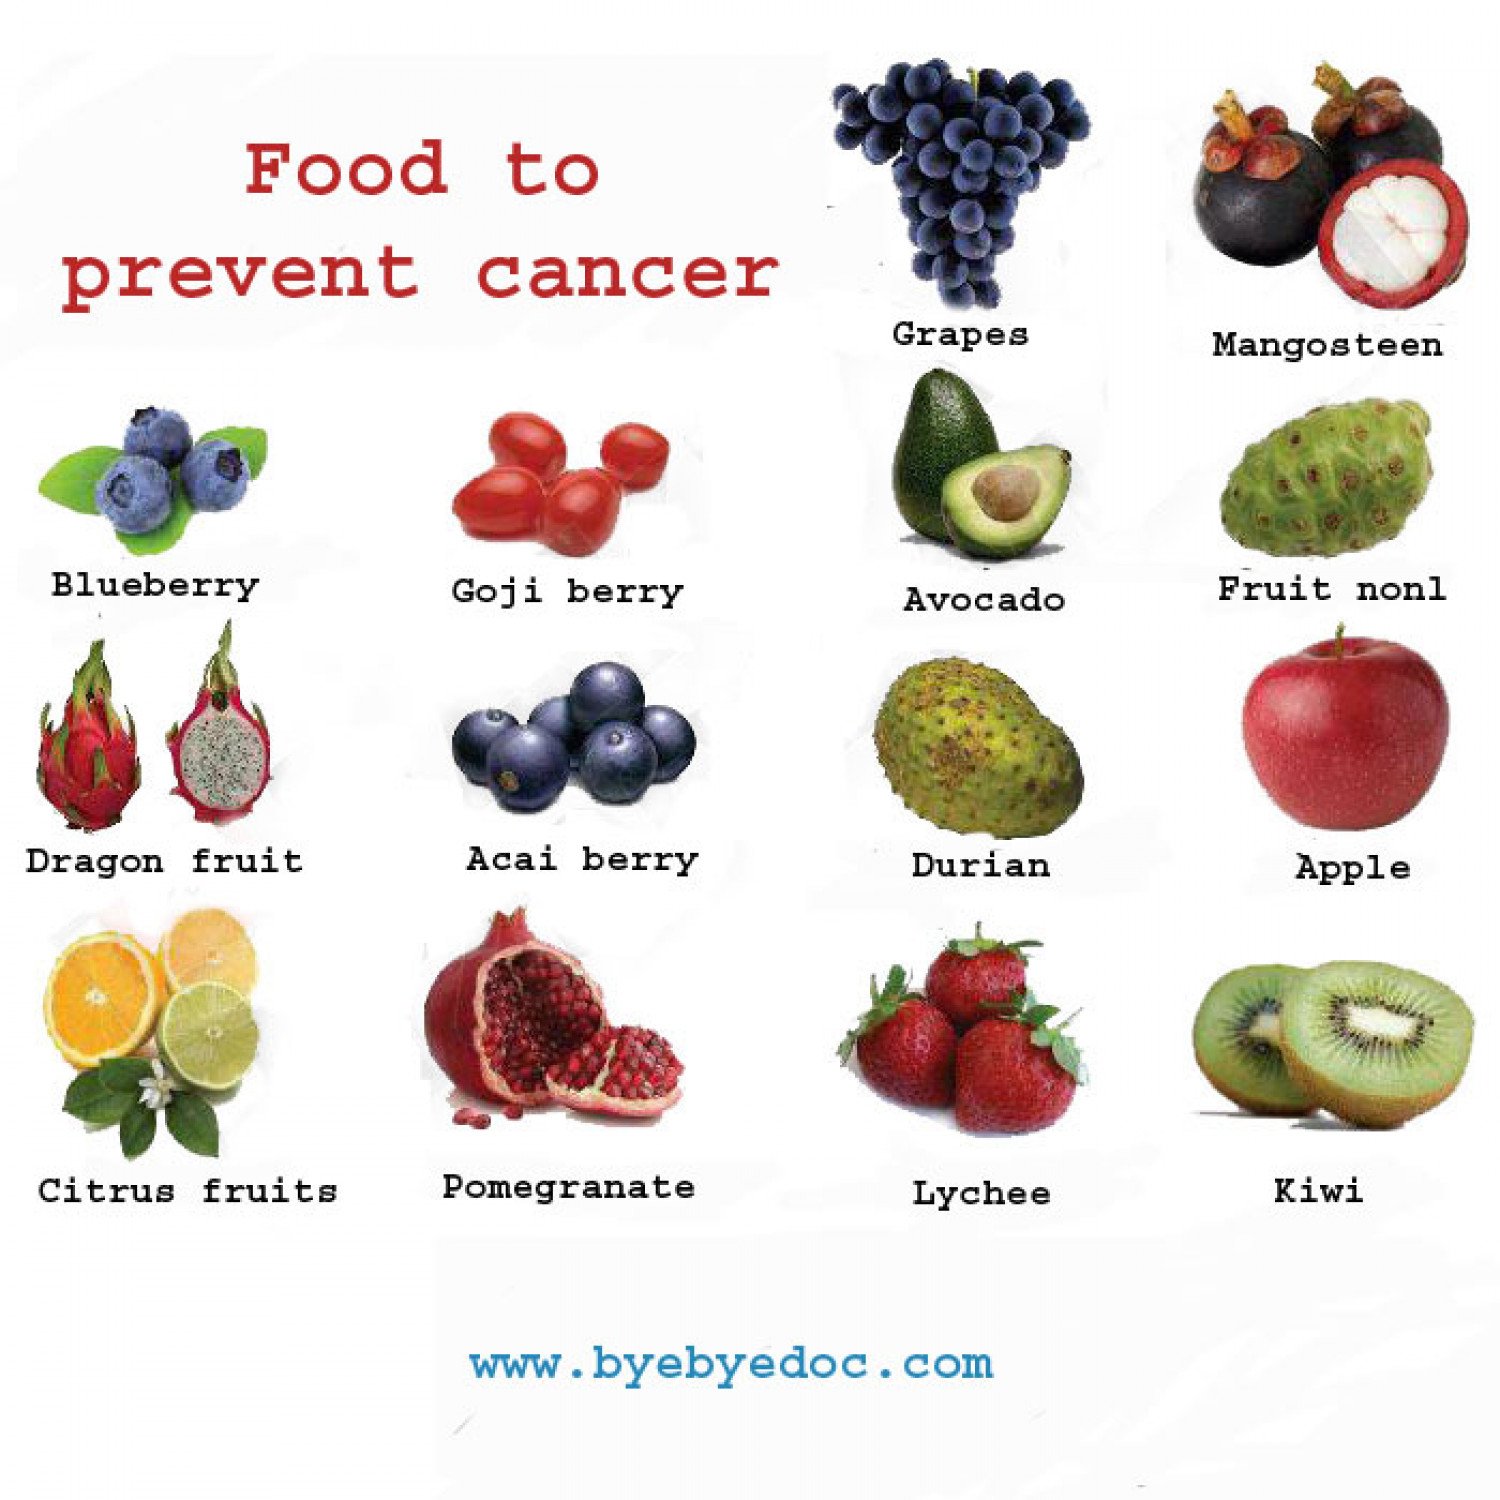 Food to prevent cancer